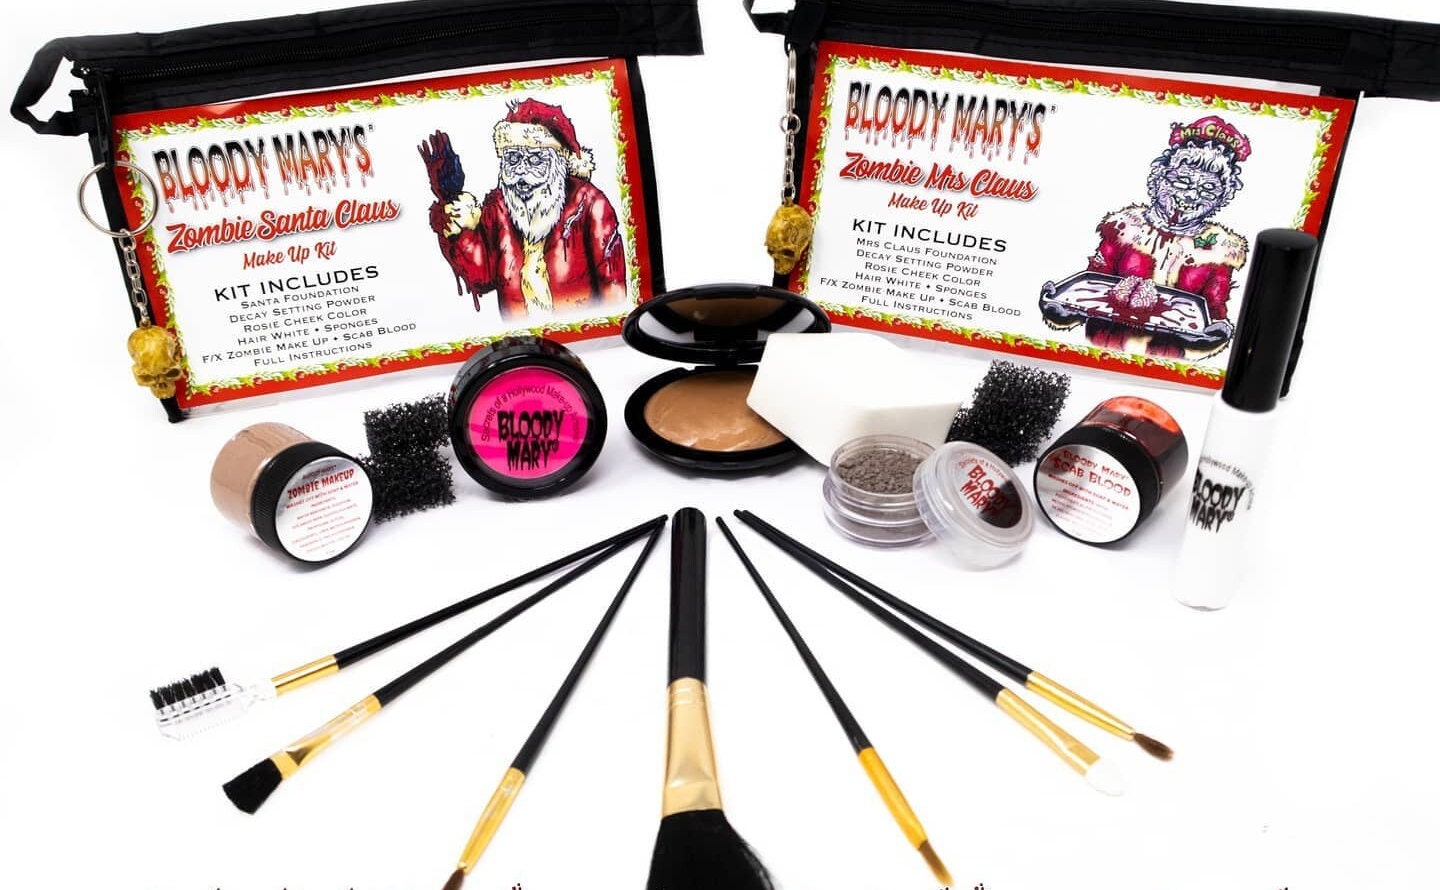 Ice FX Pro Makeup Kit, Special Effects Winter Frozen Cosmetic Kit 